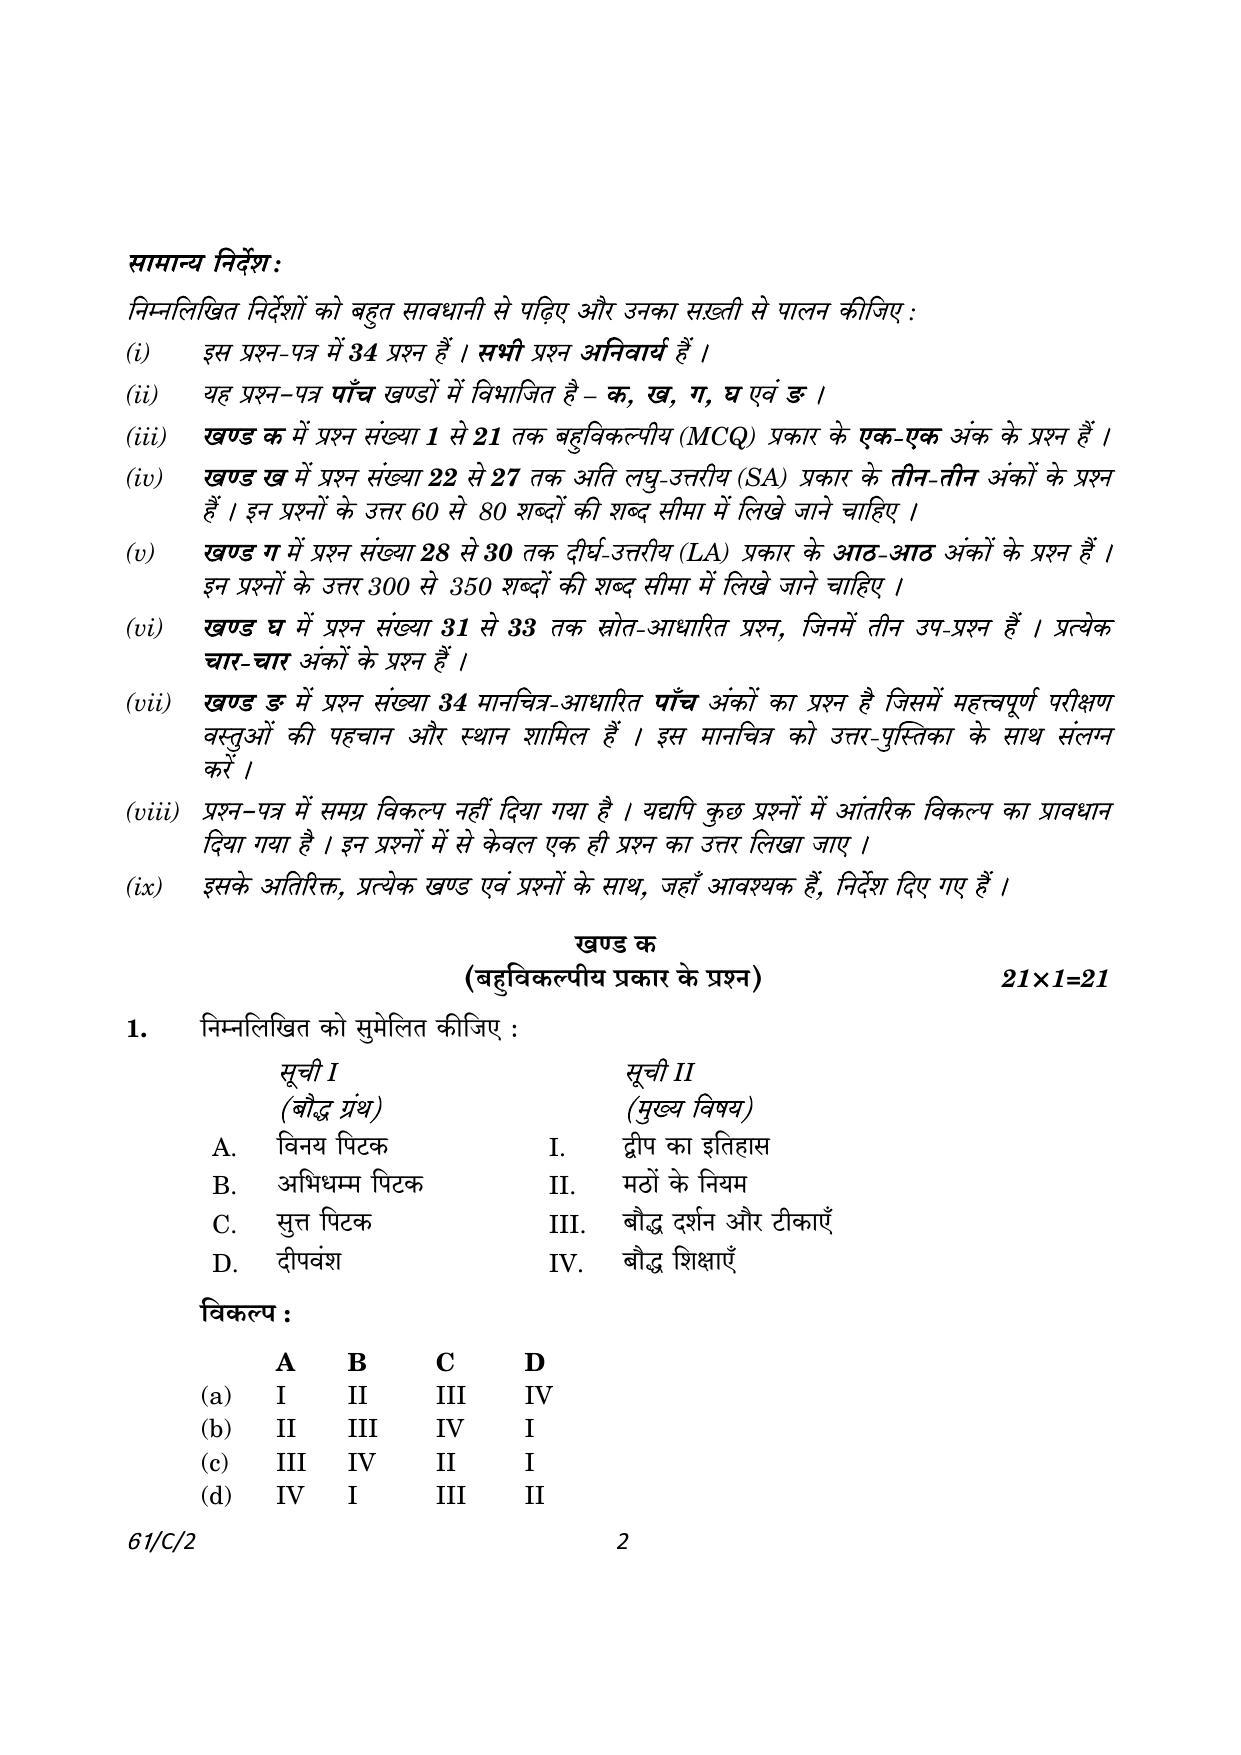 CBSE Class 12 61-2 History 2023 (Compartment) Question Paper - Page 2